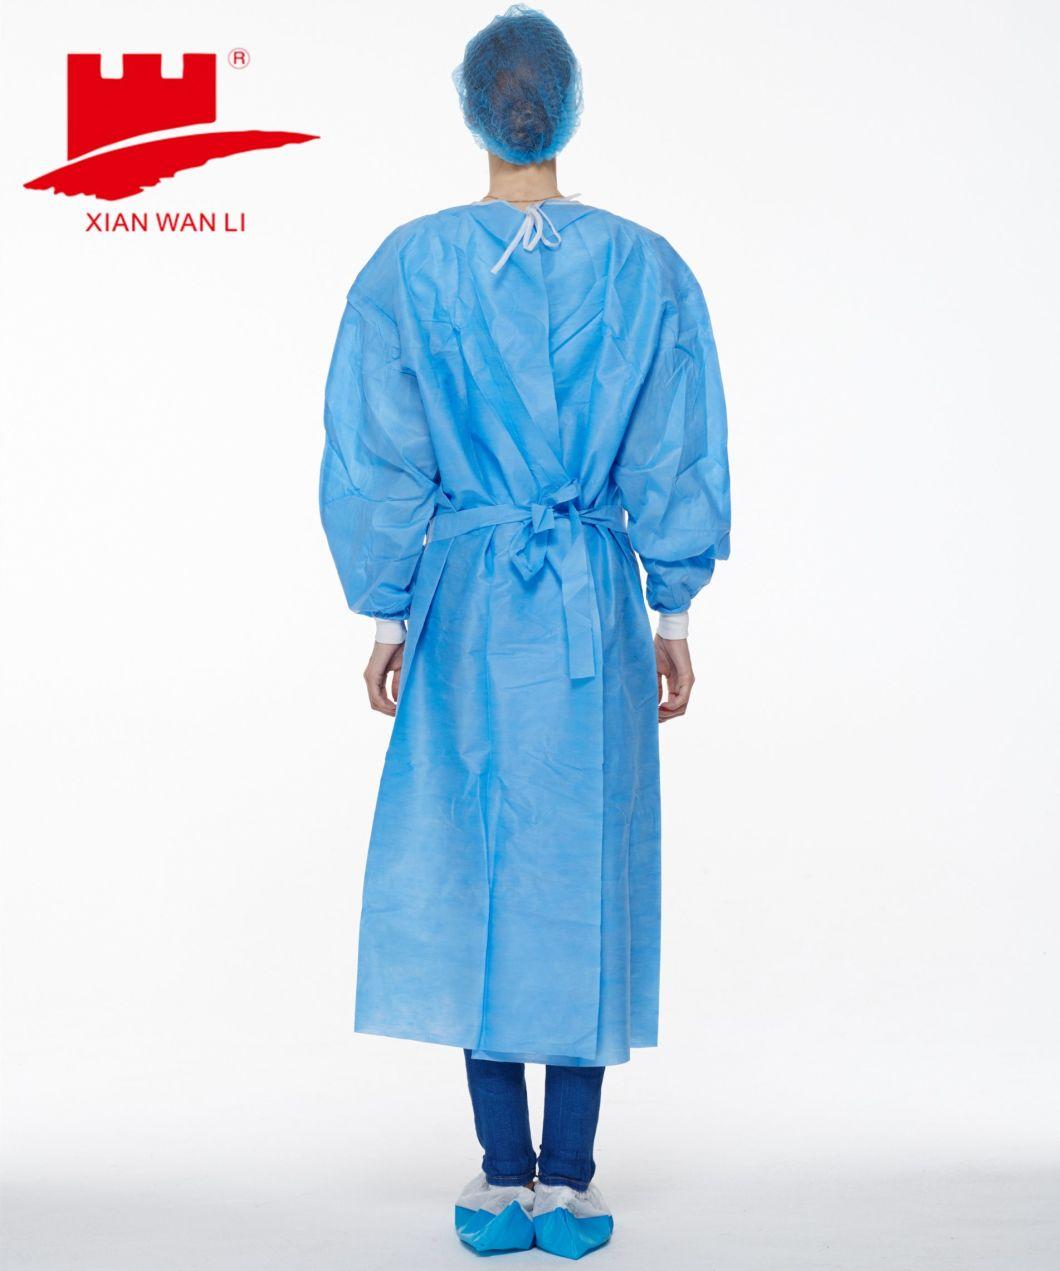 Level 2 PP PE Cheap Disposable Medical Gowns Sterile Surgical Gown Suit